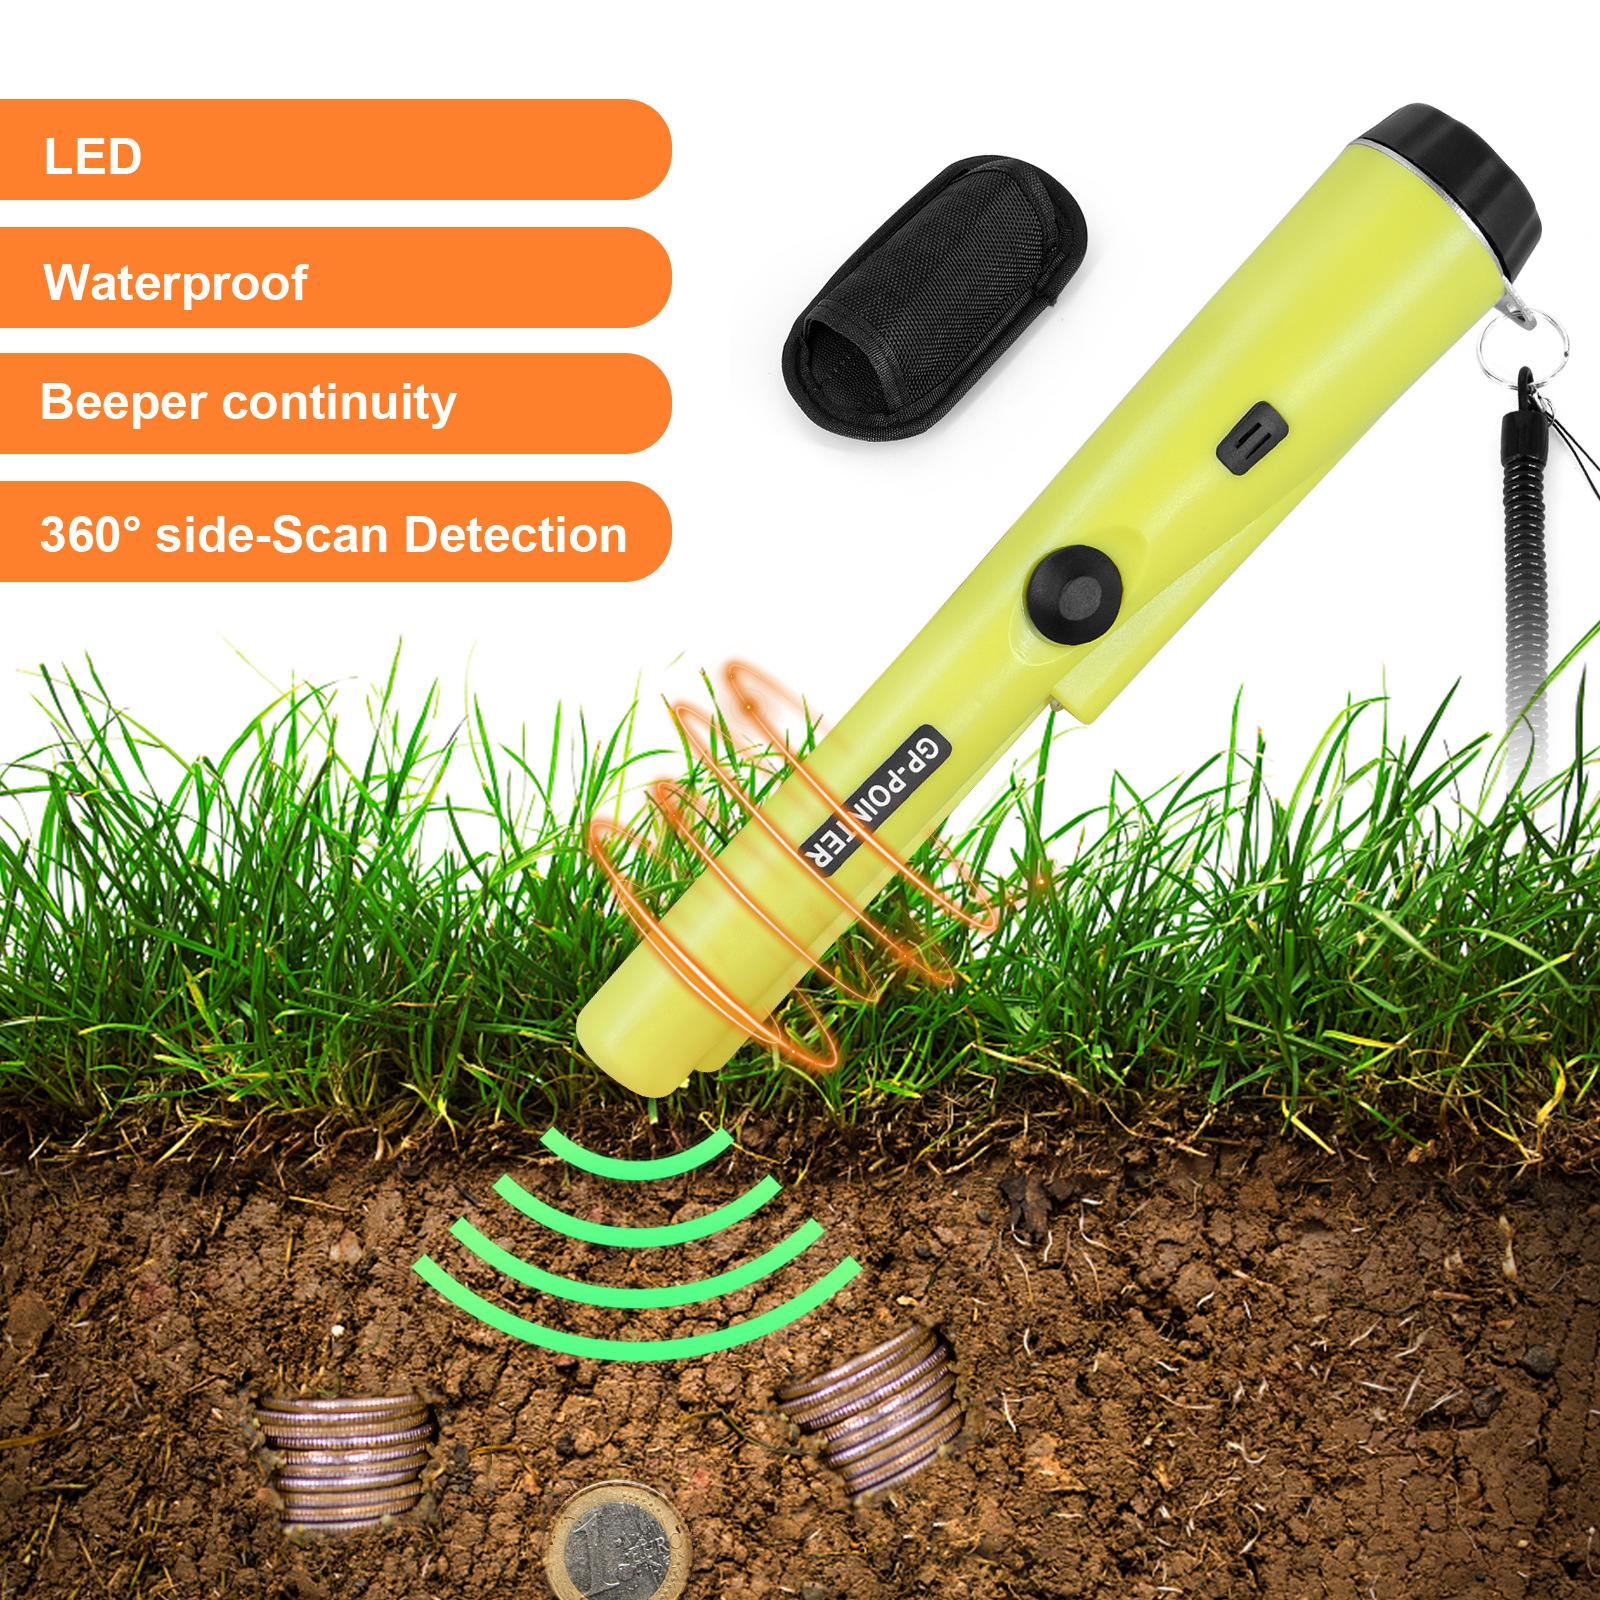 Fully Waterproof Pinpoint Metal Detector Pinpointer - Stick Include a 9V  Battery 360 Search Treasure Pinpointing Finder Probe with Belt Holster for